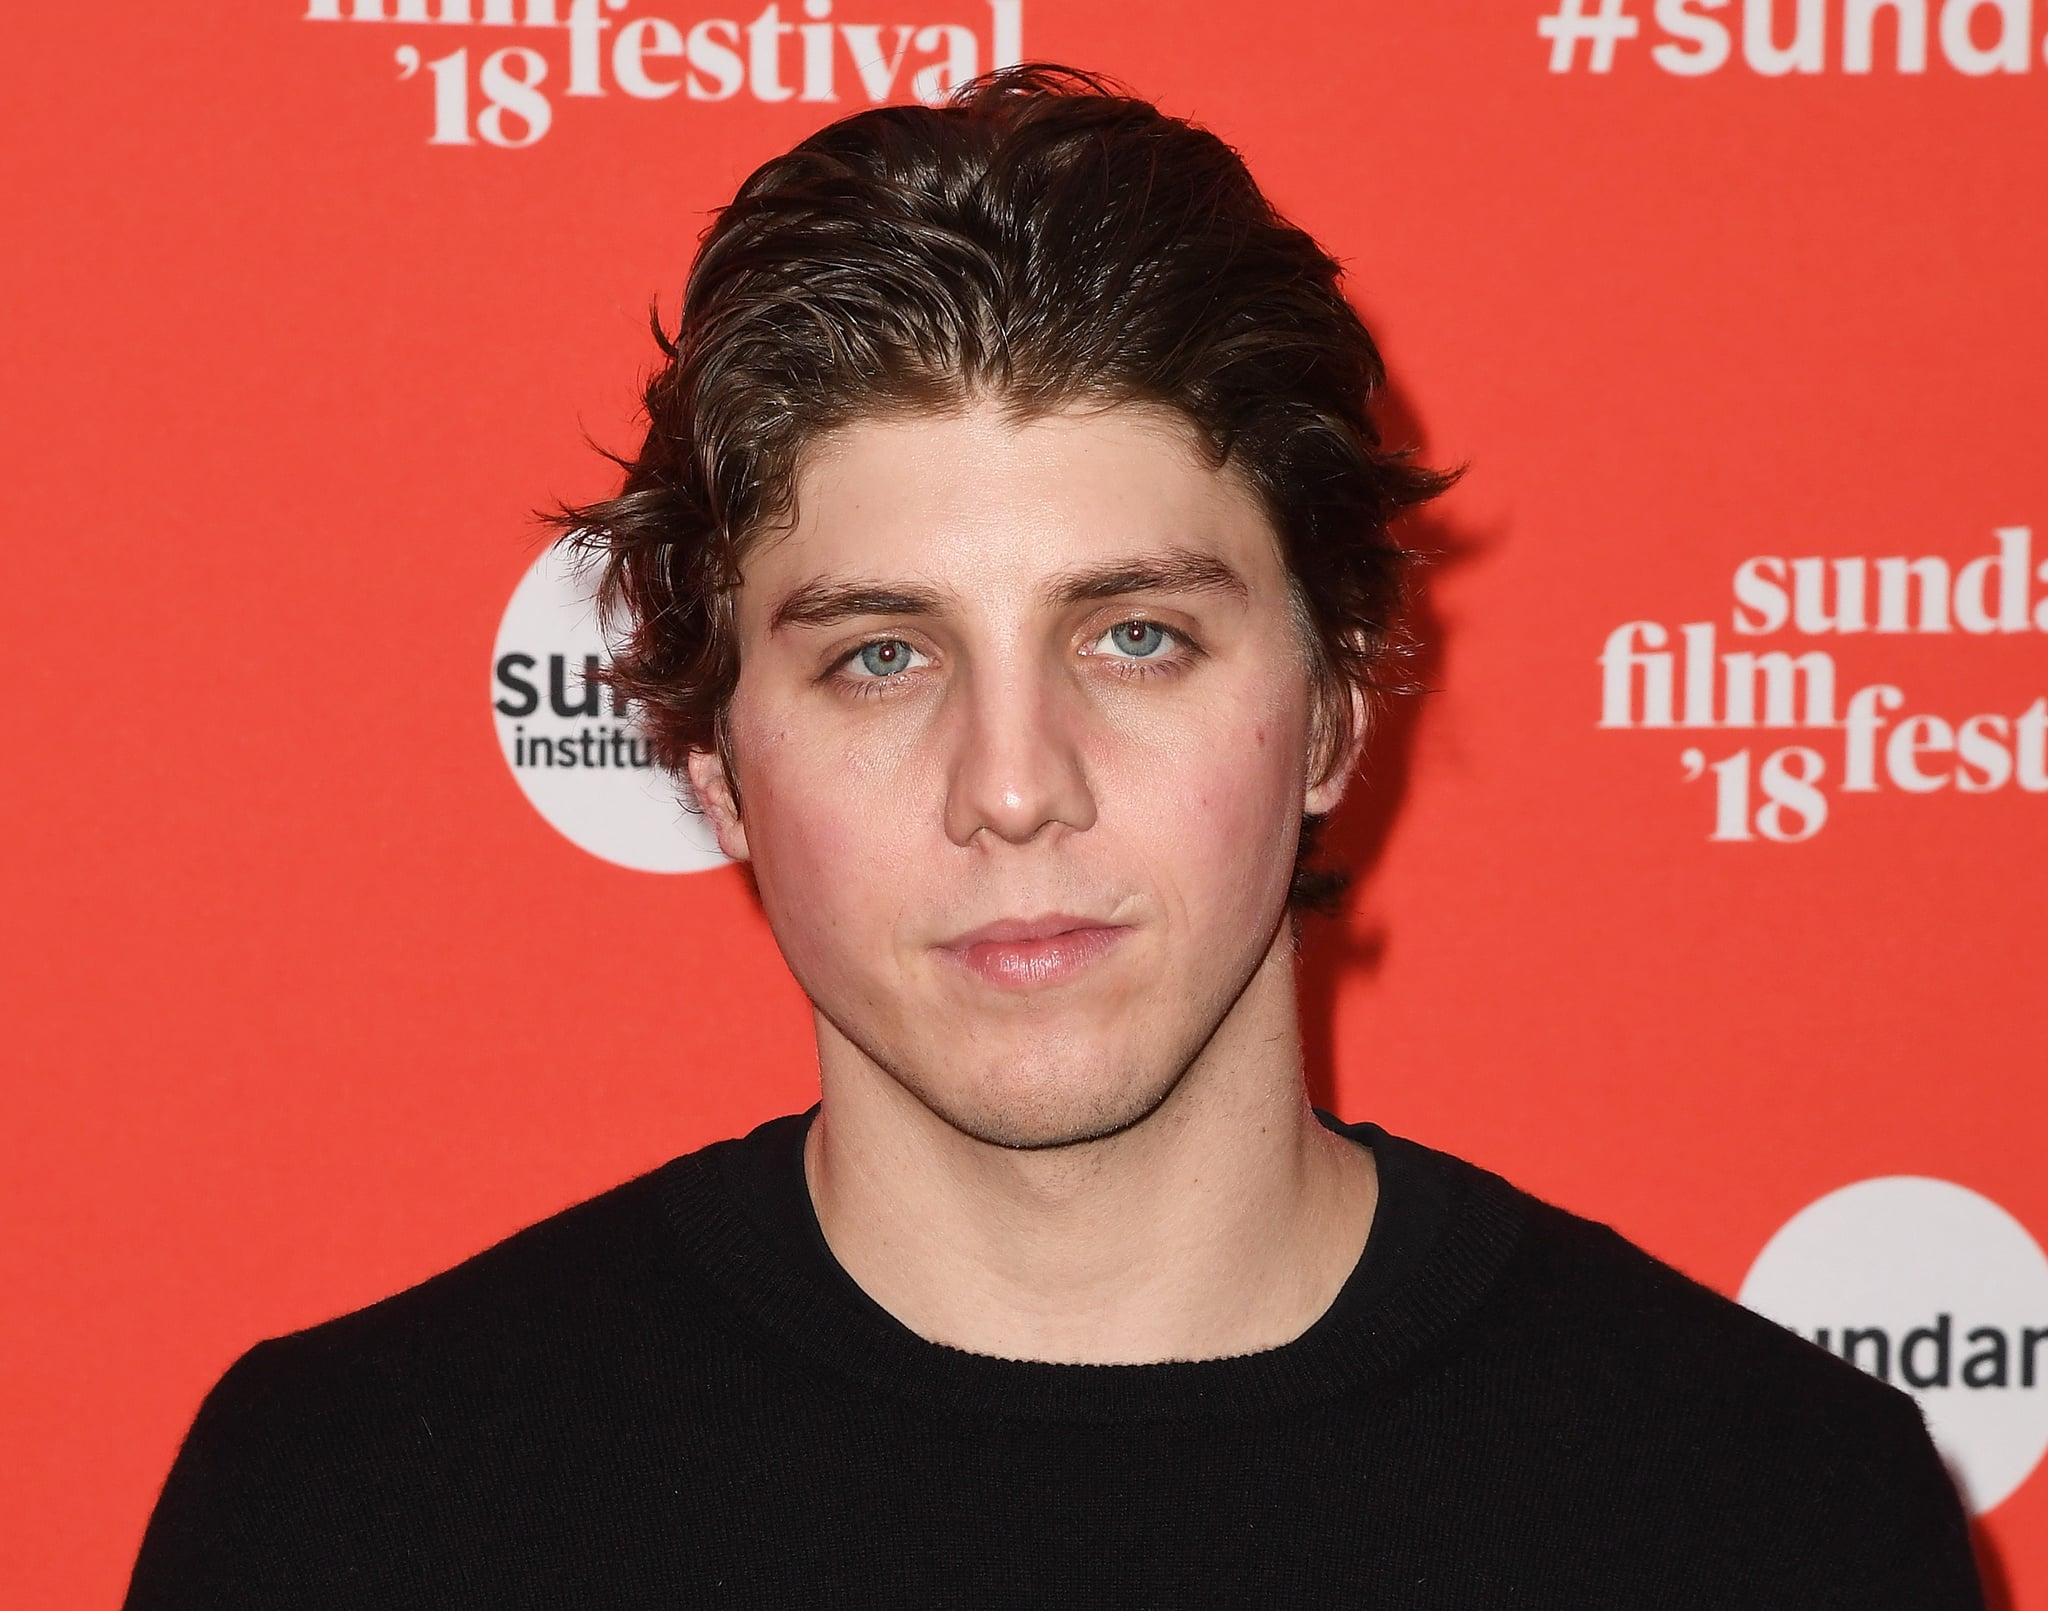 PARK CITY, UT - JANUARY 21:  Lukas Gage attends the 'Assassination Nation' Premiere during the 2018 Sundance Film Festival at Park City Library on January 21, 2018 in Park City, Utah.  (Photo by C Flanigan/FilmMagic)